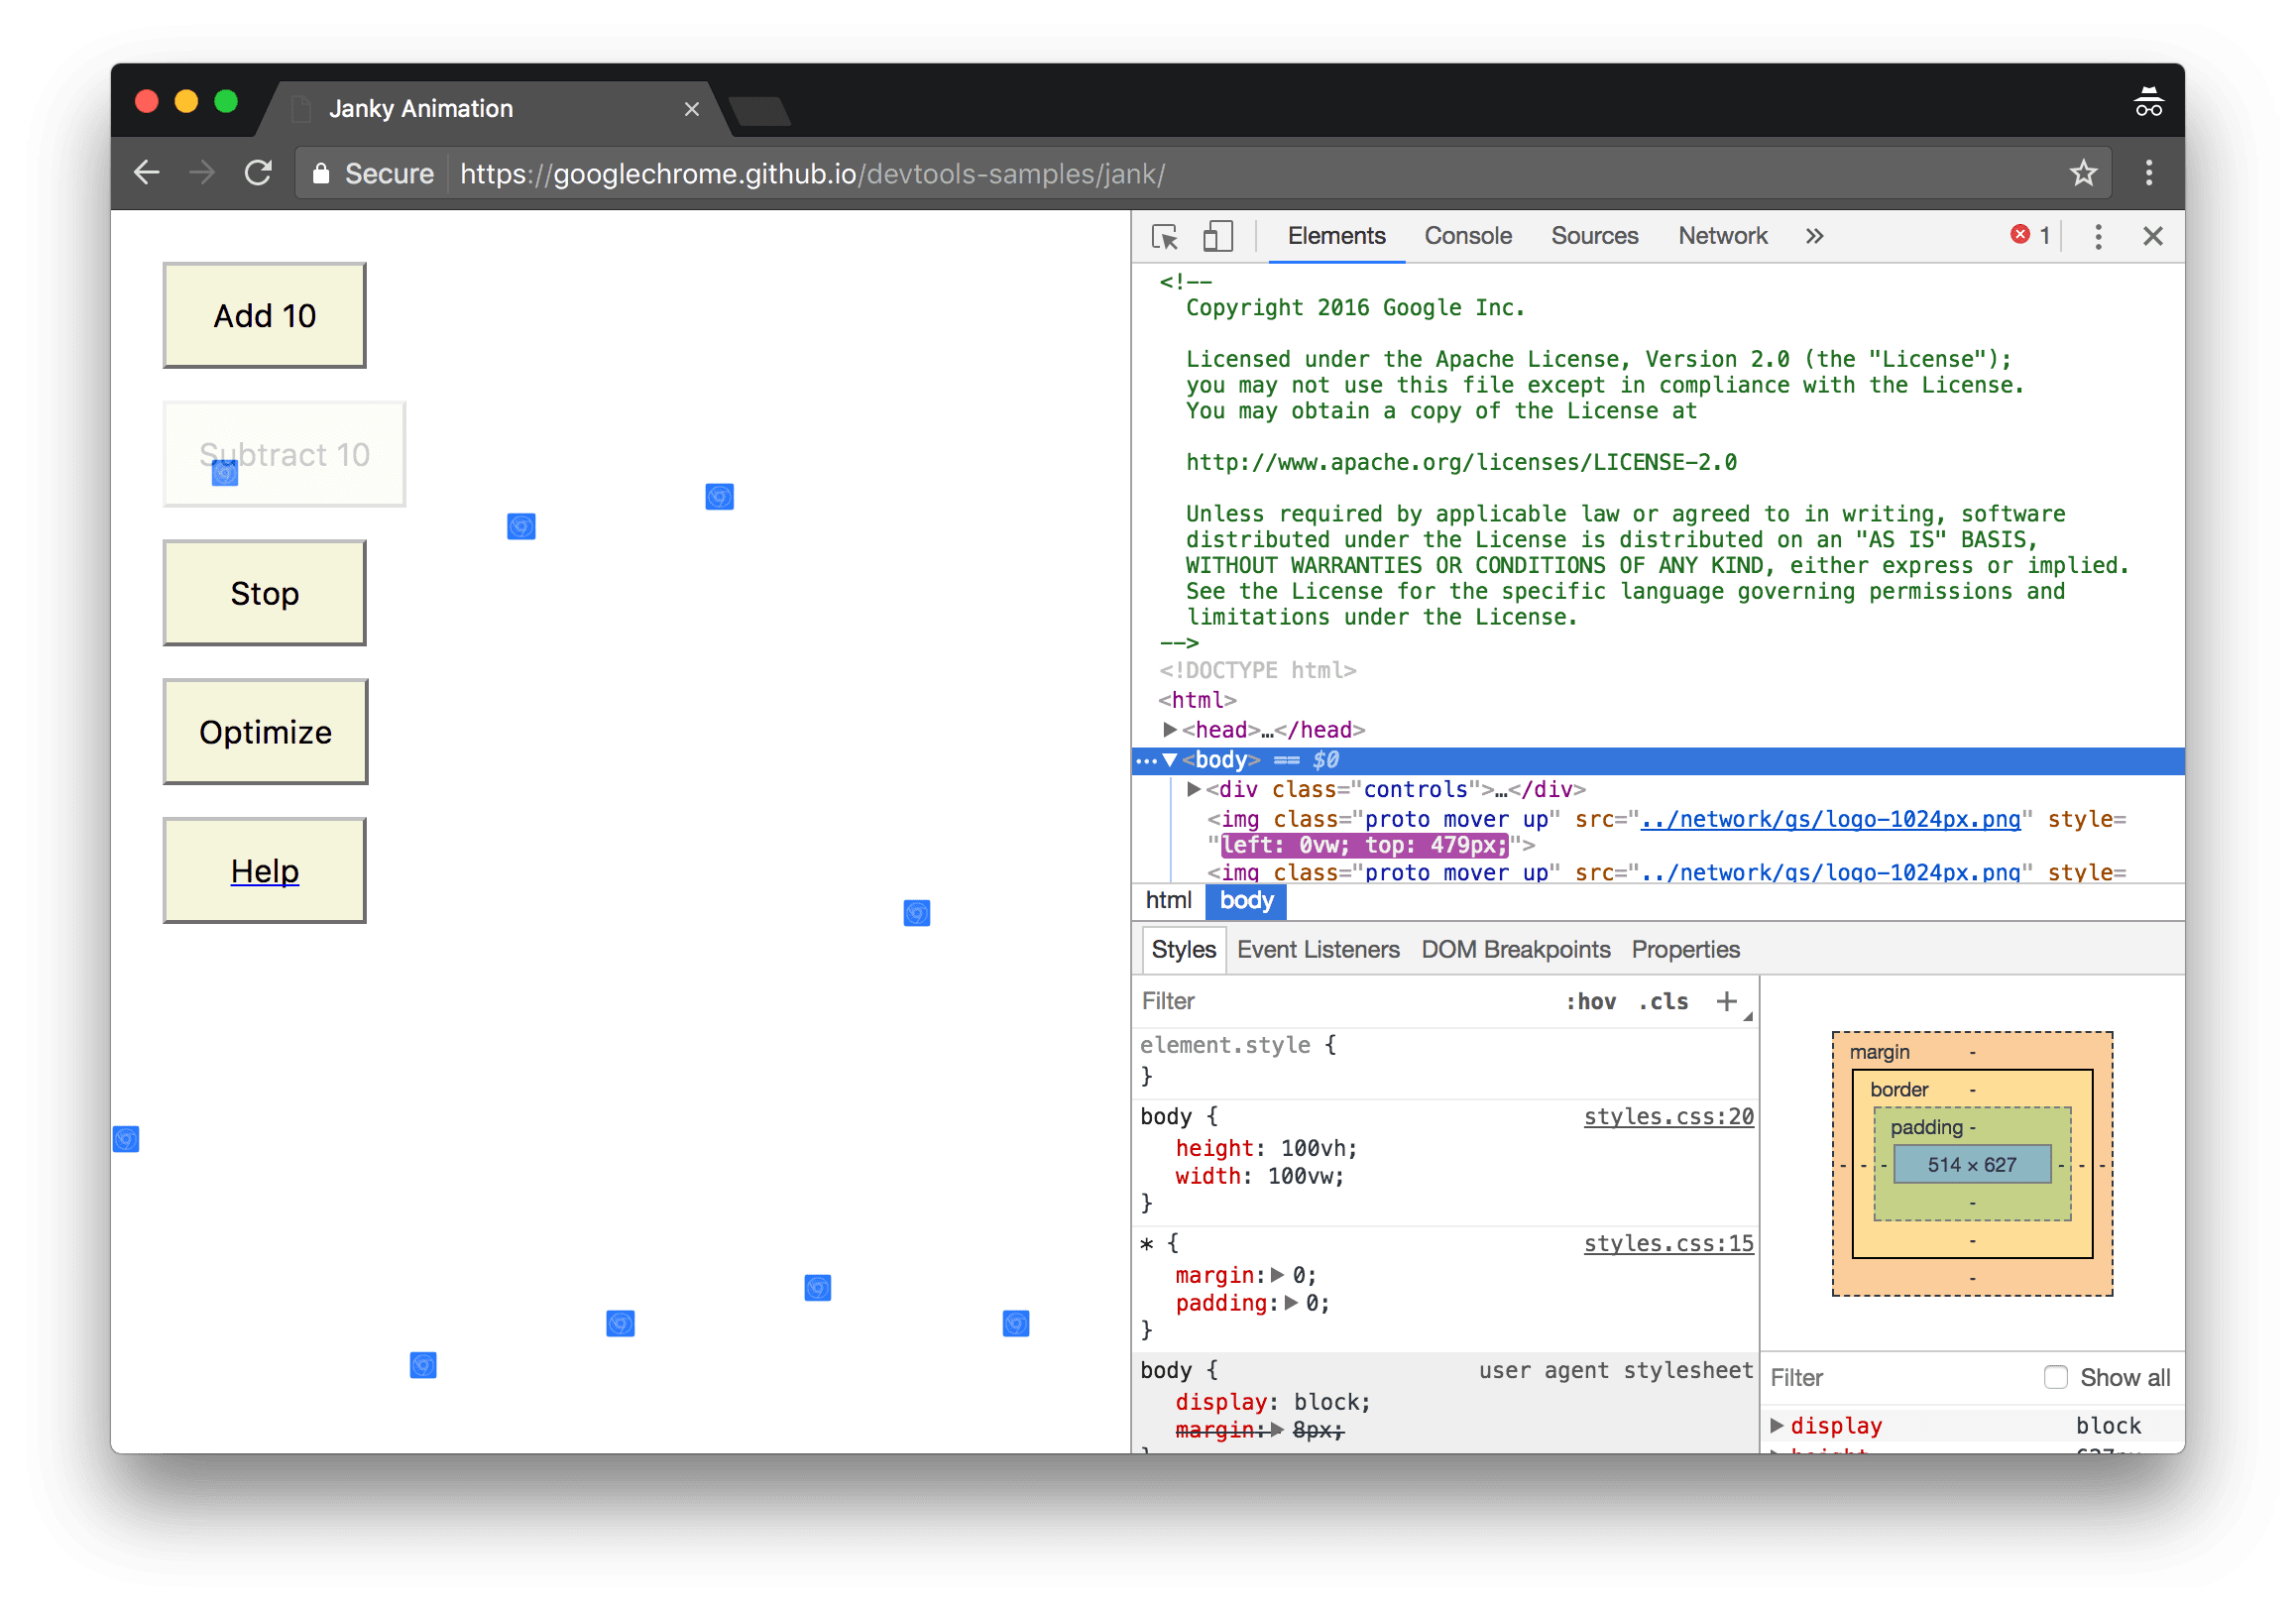 The demo on the left, and DevTools on the right